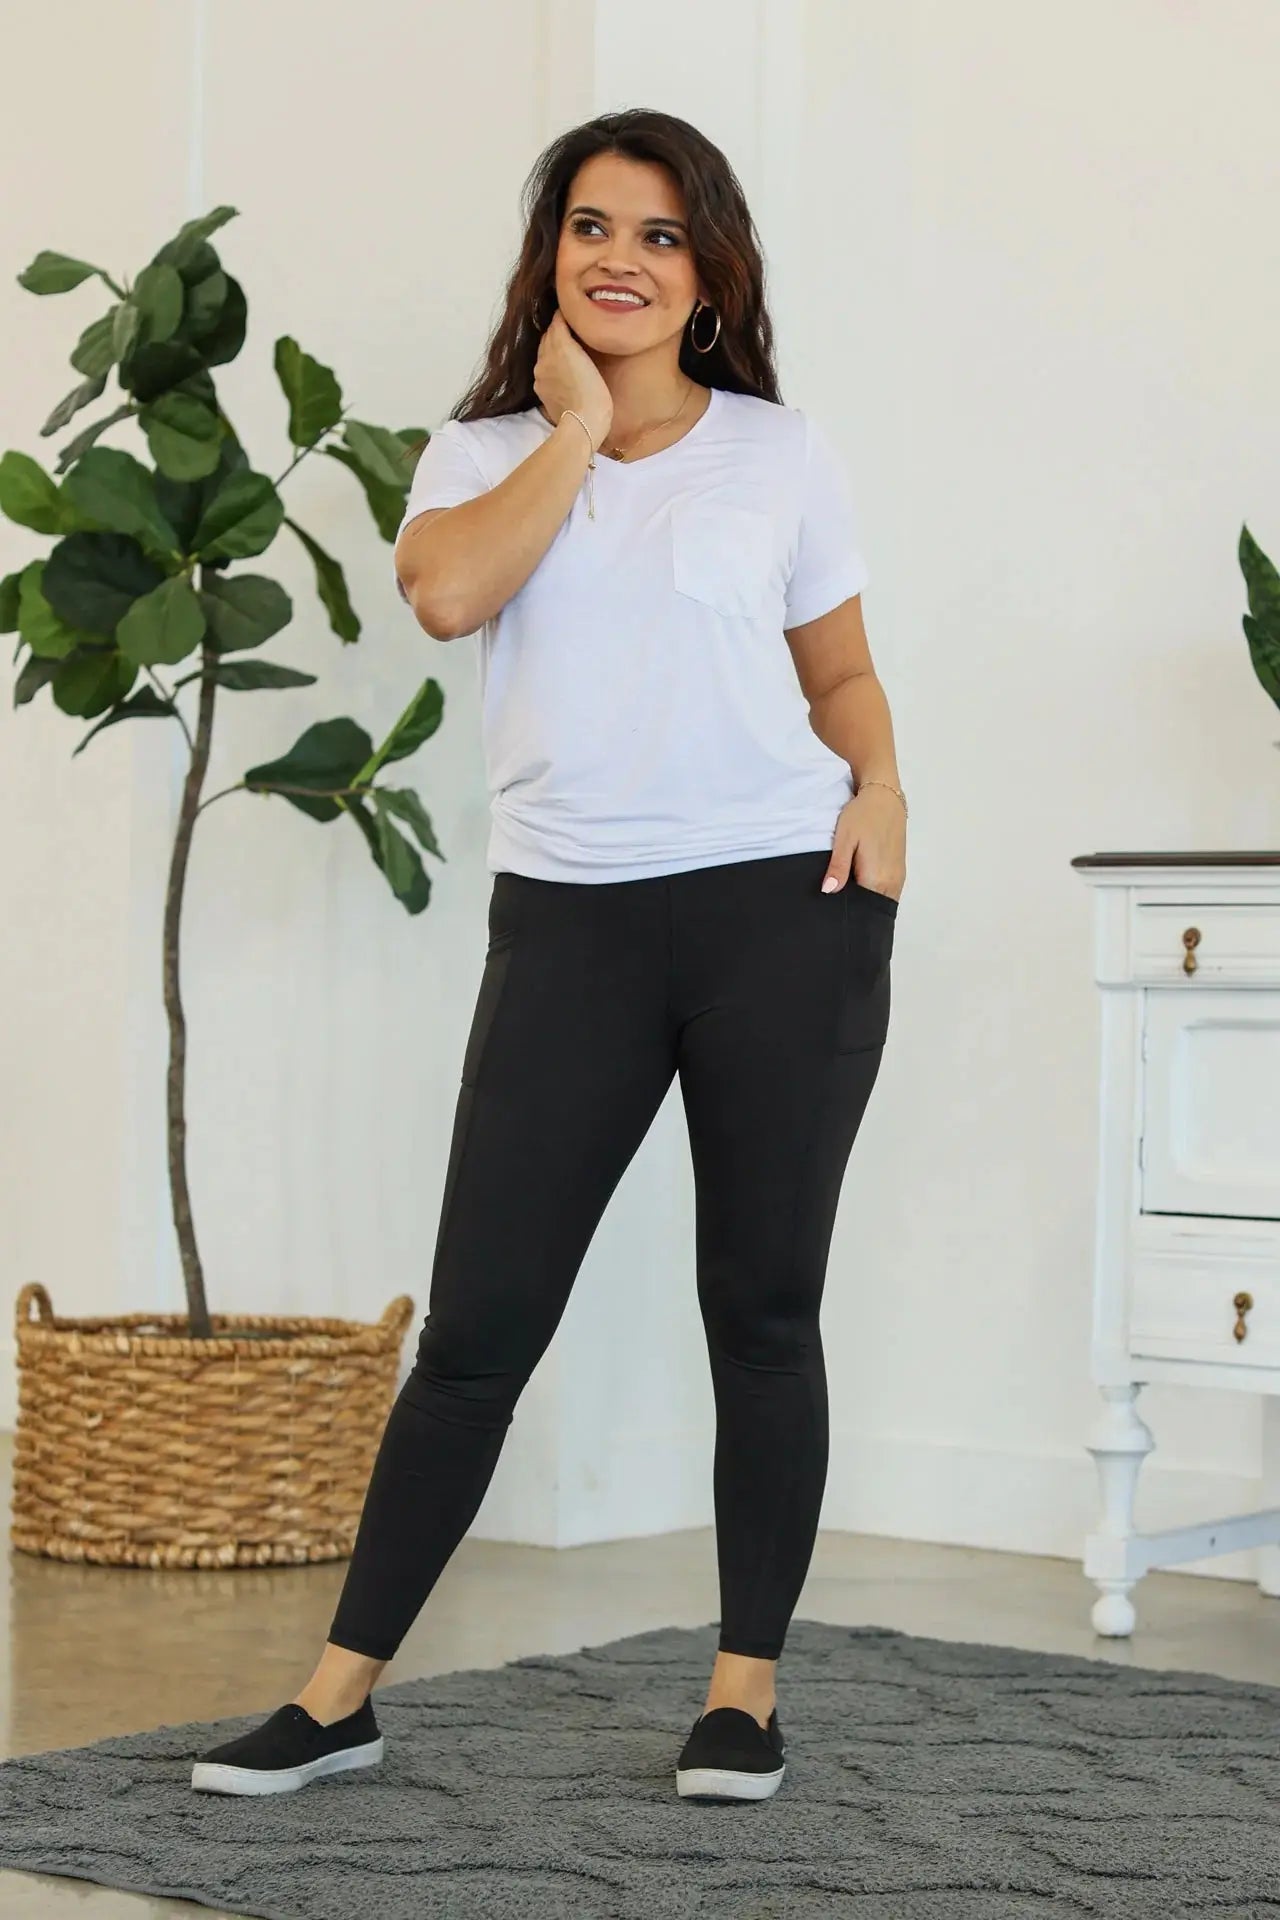 Athleisure Leggings - High-Performance Workout Pants - Stylish Yoga Tights - Flexible Gym Wear - Gift for Fitness Lovers